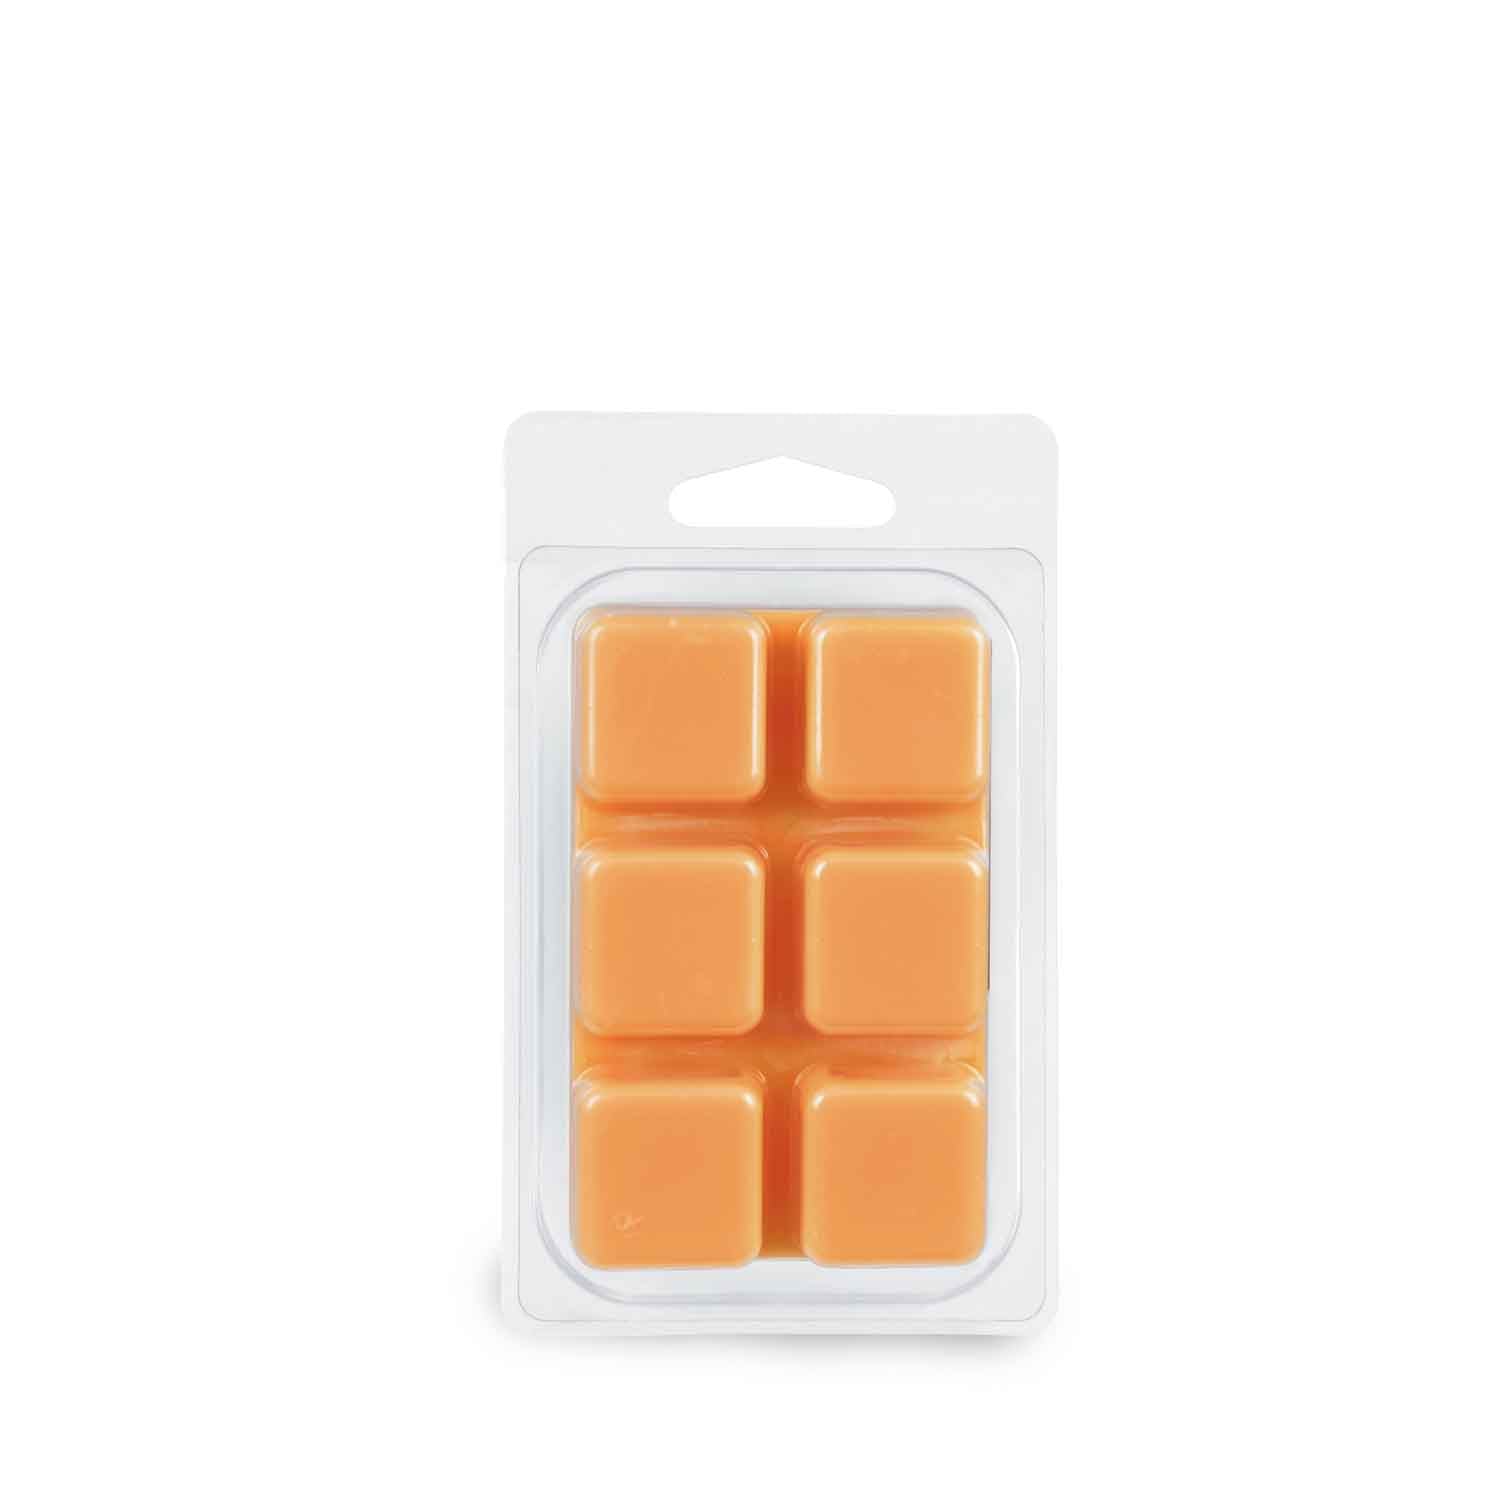 A pack of Orange Vanilla Scented Wax Melts (2.5 oz) by Tuscany Candle® on a white background.